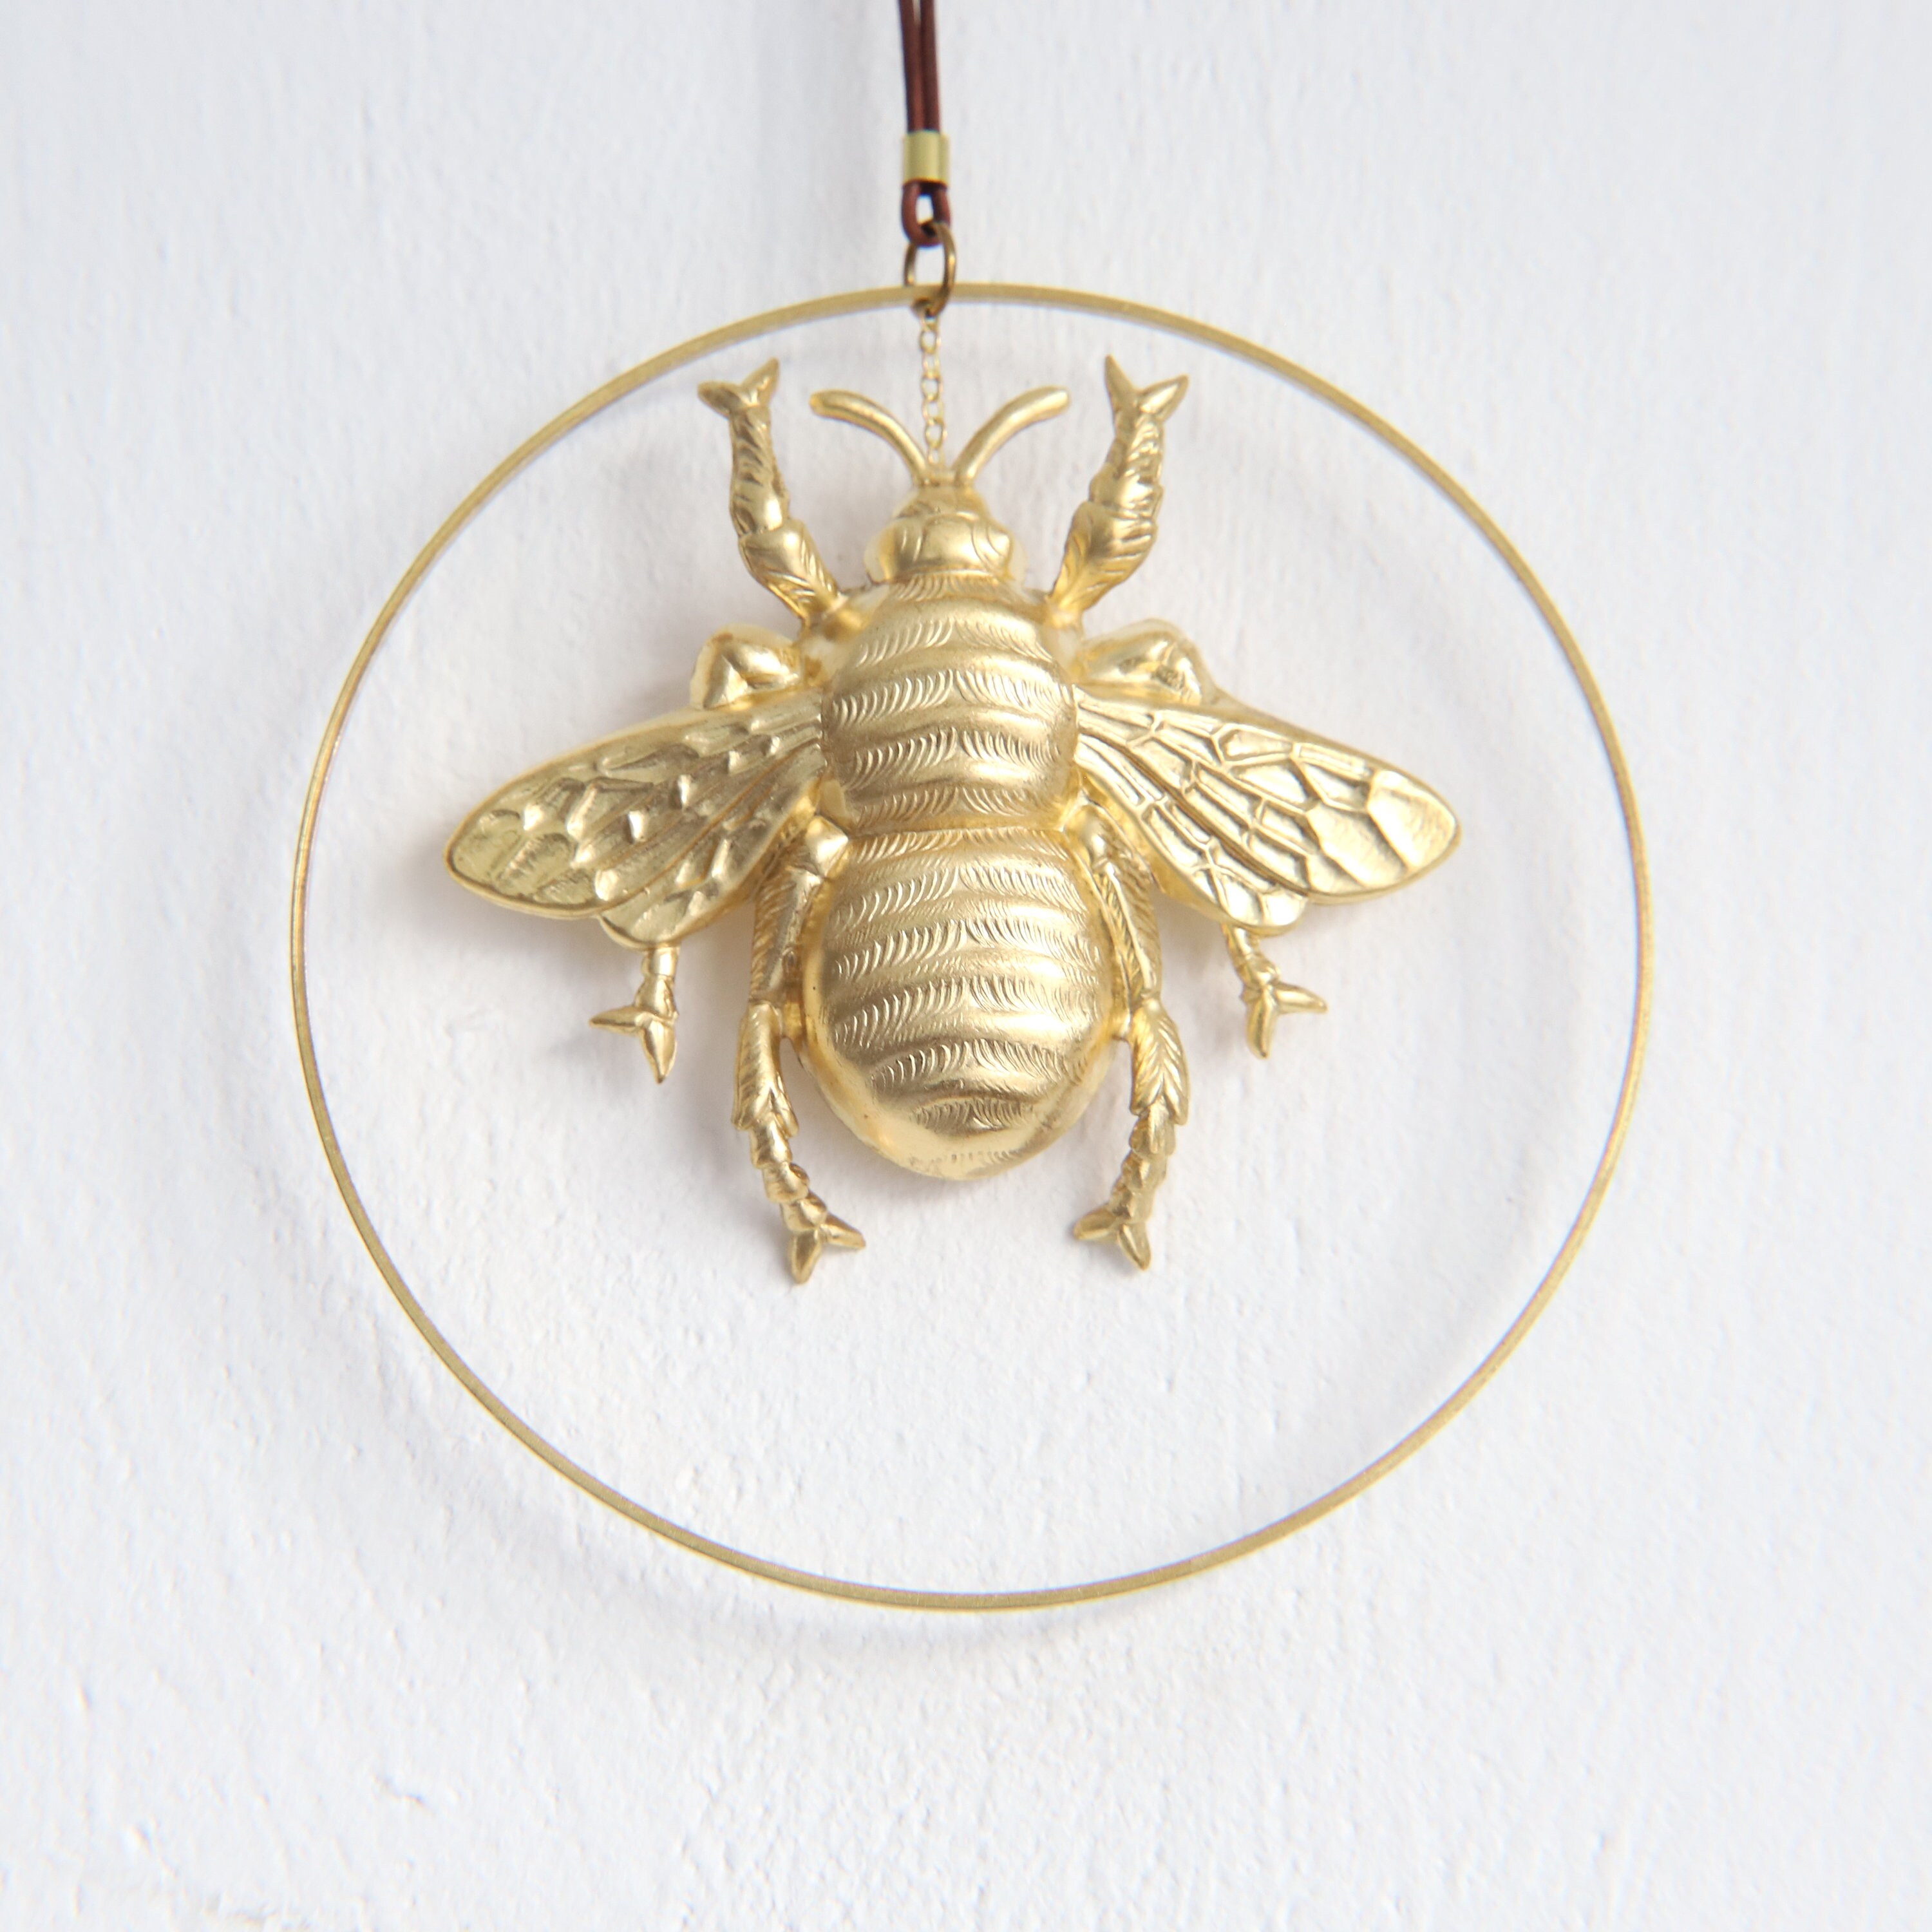 Bee Decoration Raw Brass Fern Leaf Hanging Ornament Bumble - Etsy UK